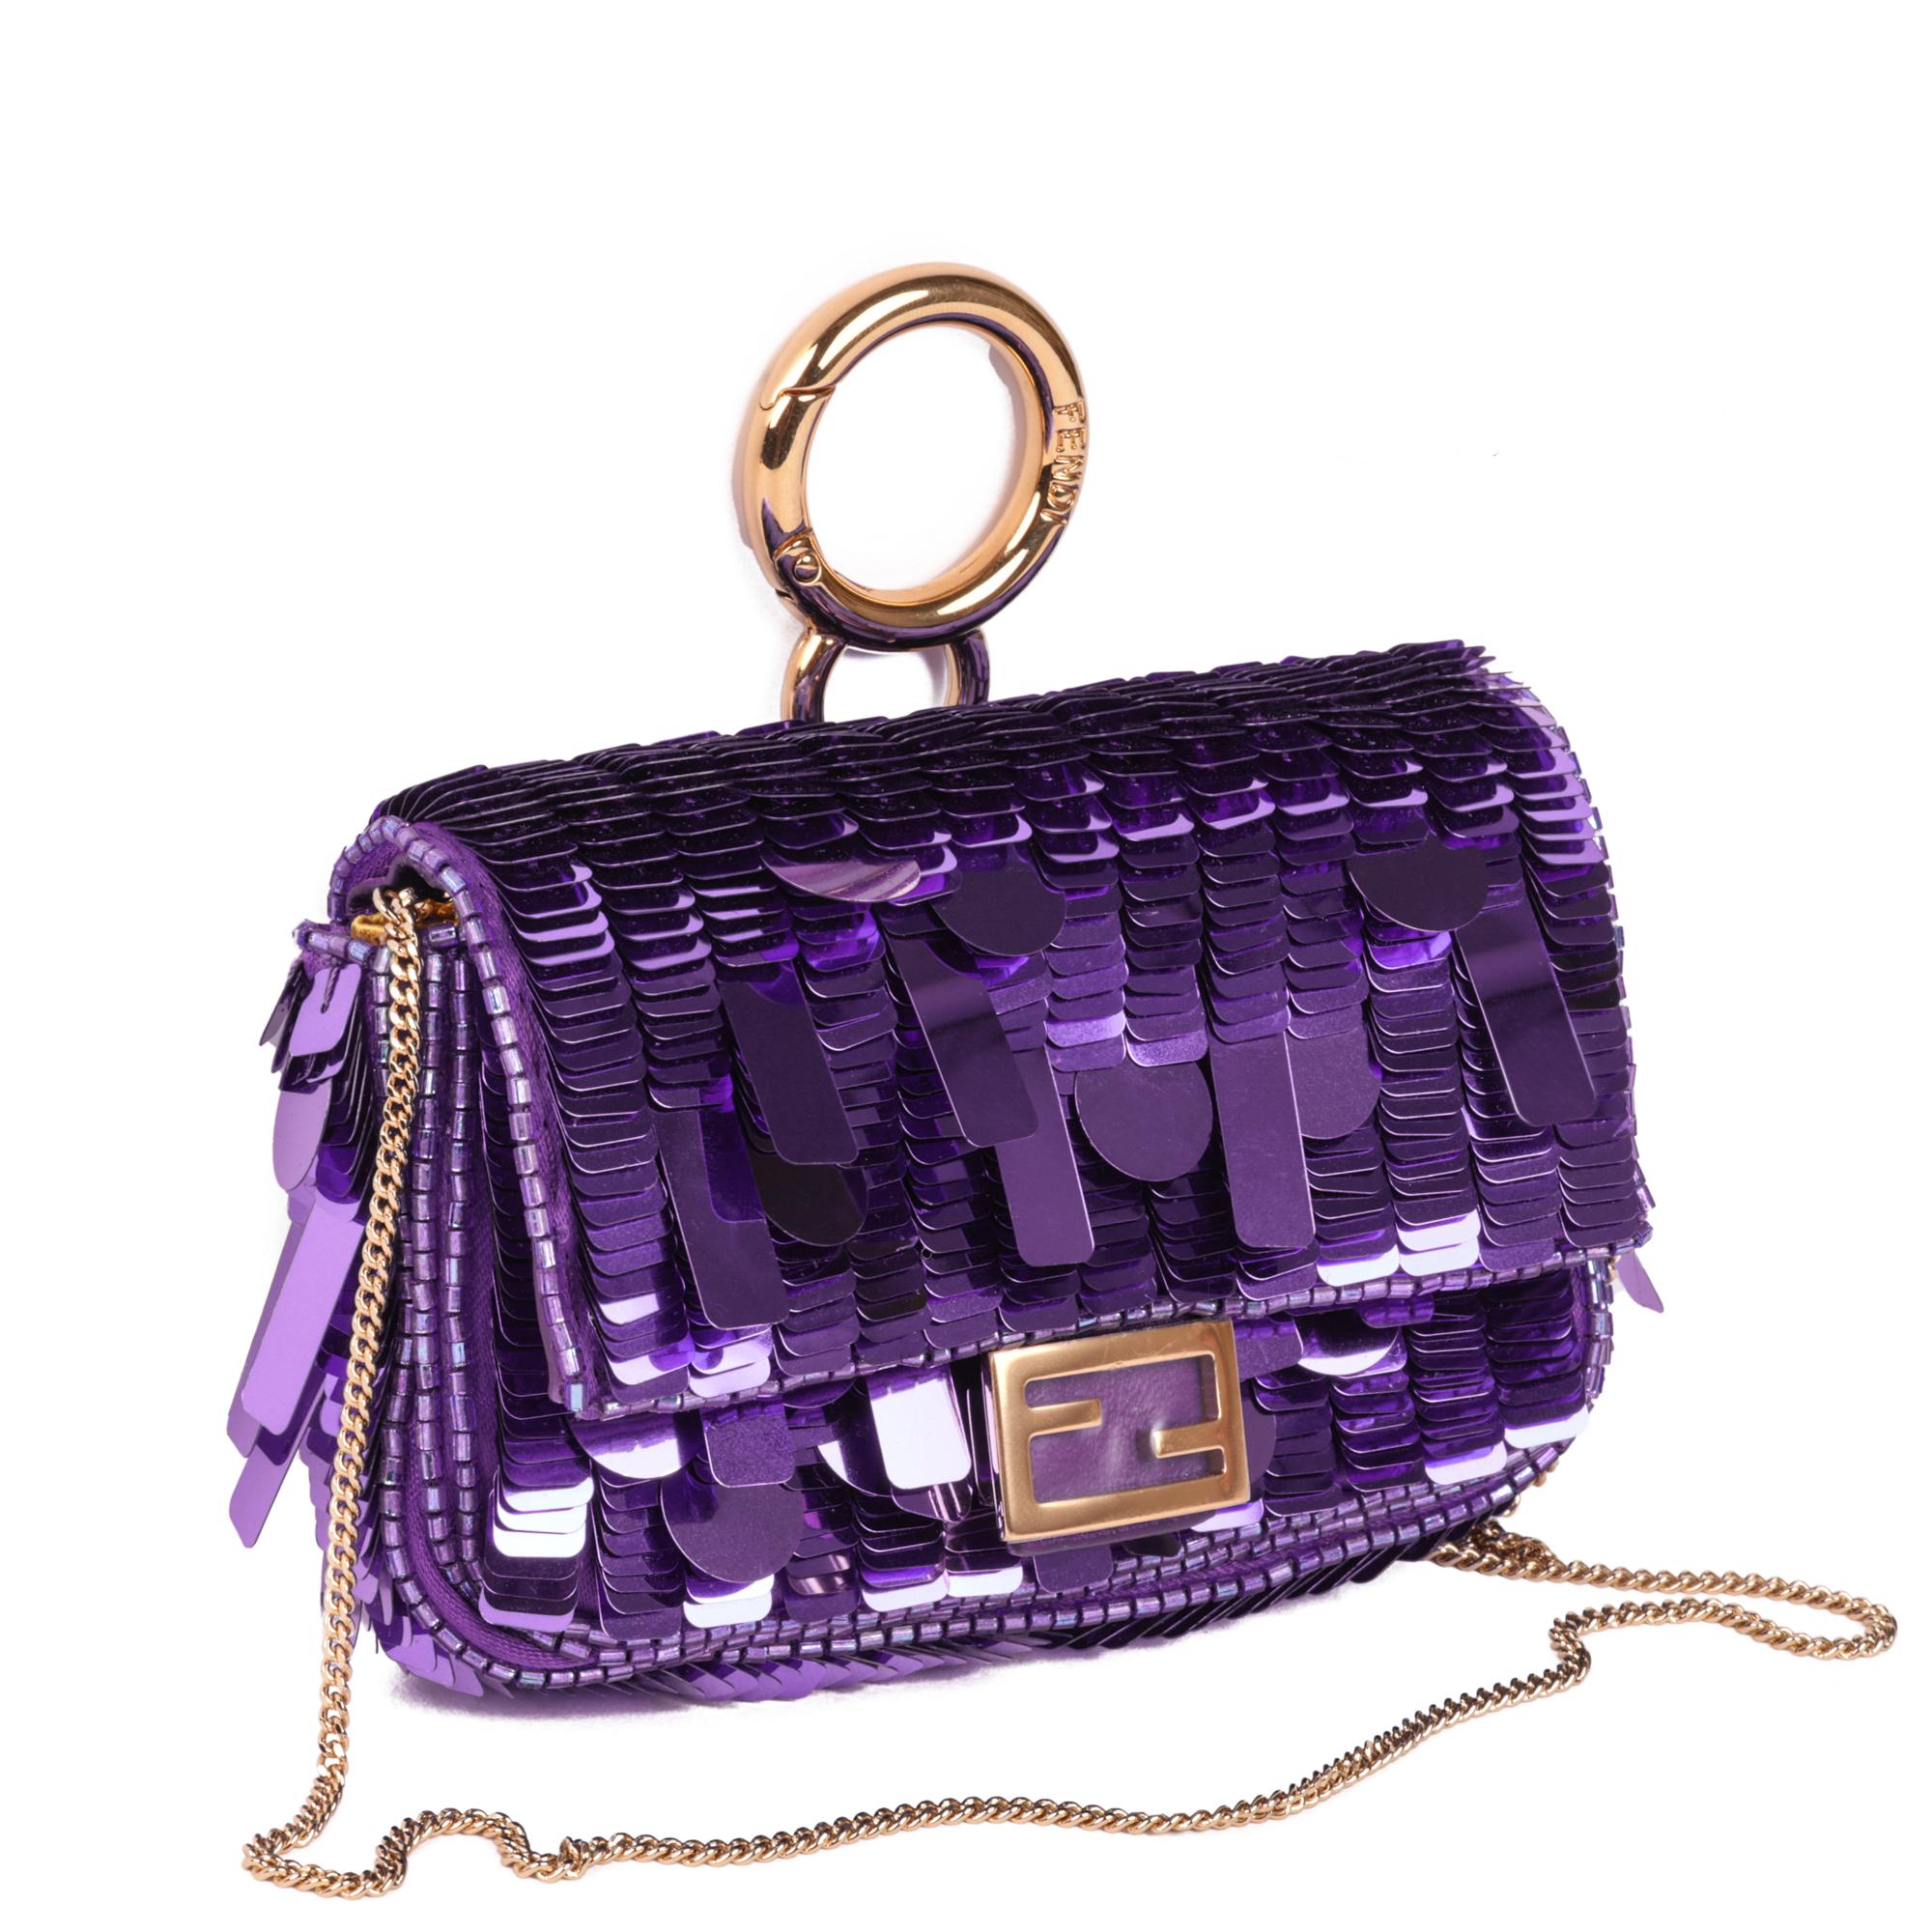 Fendi Purple Embellished Sequin & Purple Calfskin Leather Nano Baguette Charm

CONDITION NOTES
The exterior in is exceptional condition with no signs of use.
The interior is in exceptional condition with no signs of use.
The hardware is in